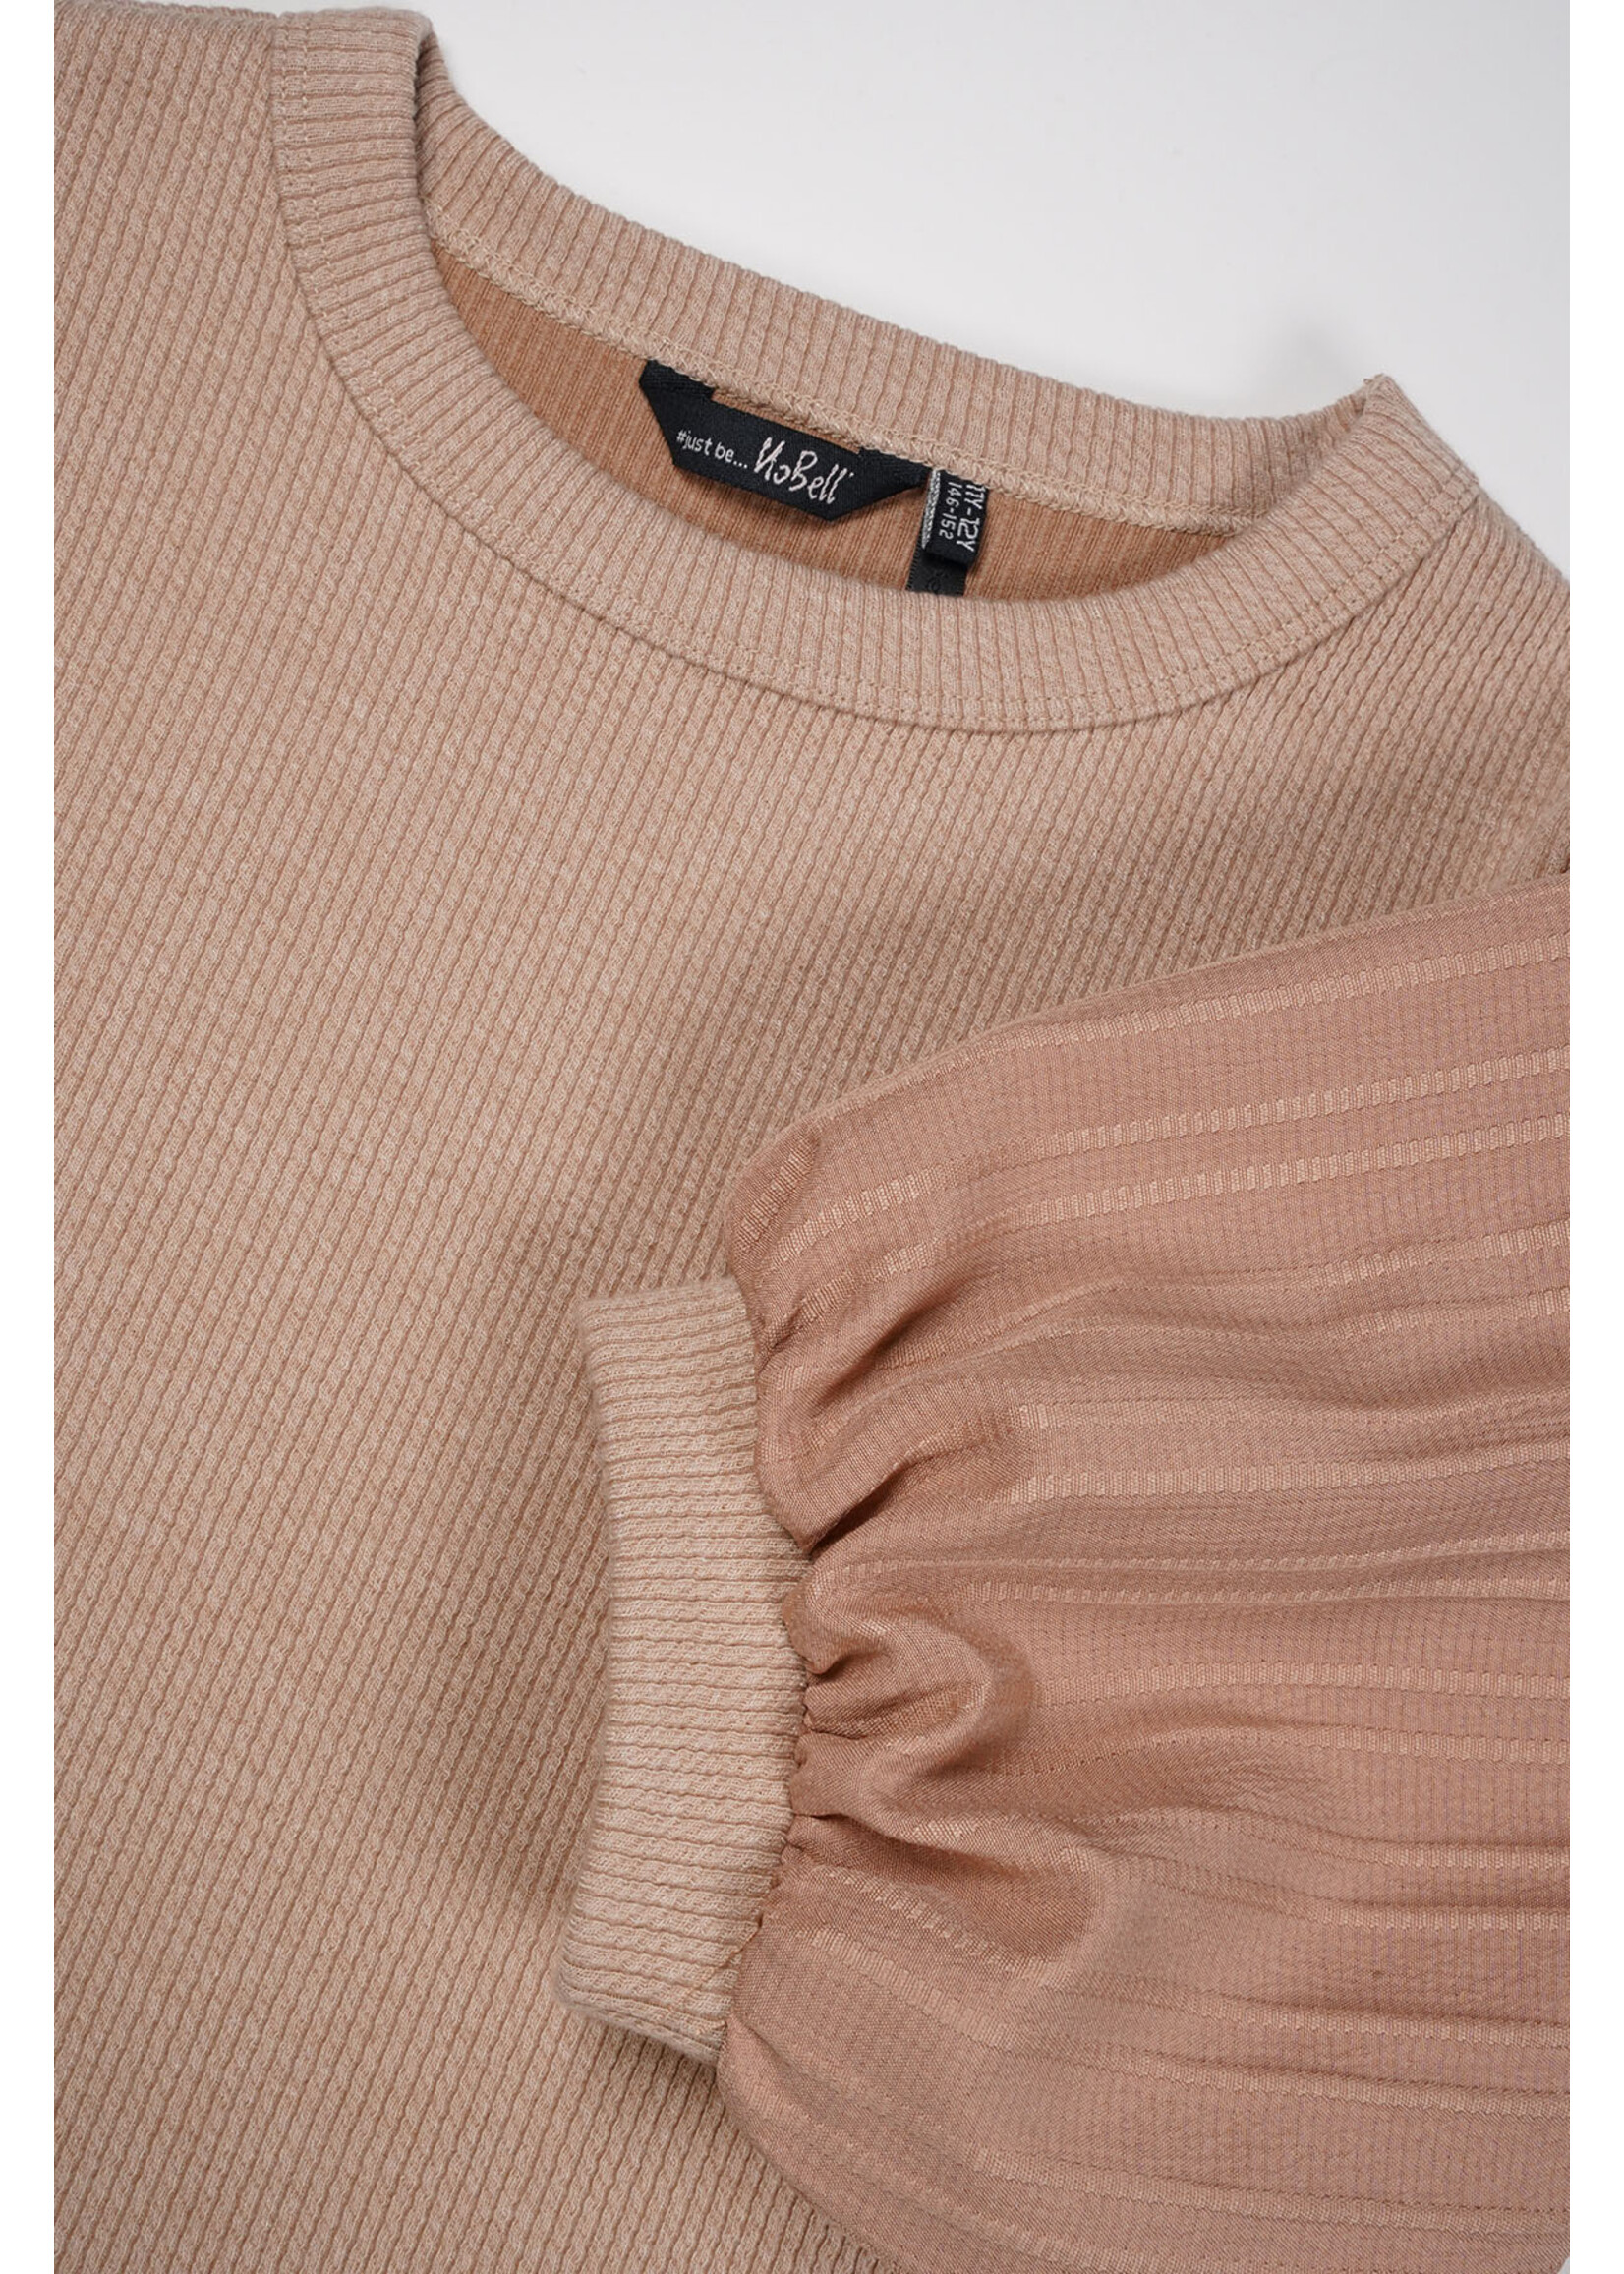 Nobell Nobell Kylia Melange Rib Top with puffed Sleeves Q402-3403 Rosy Sand